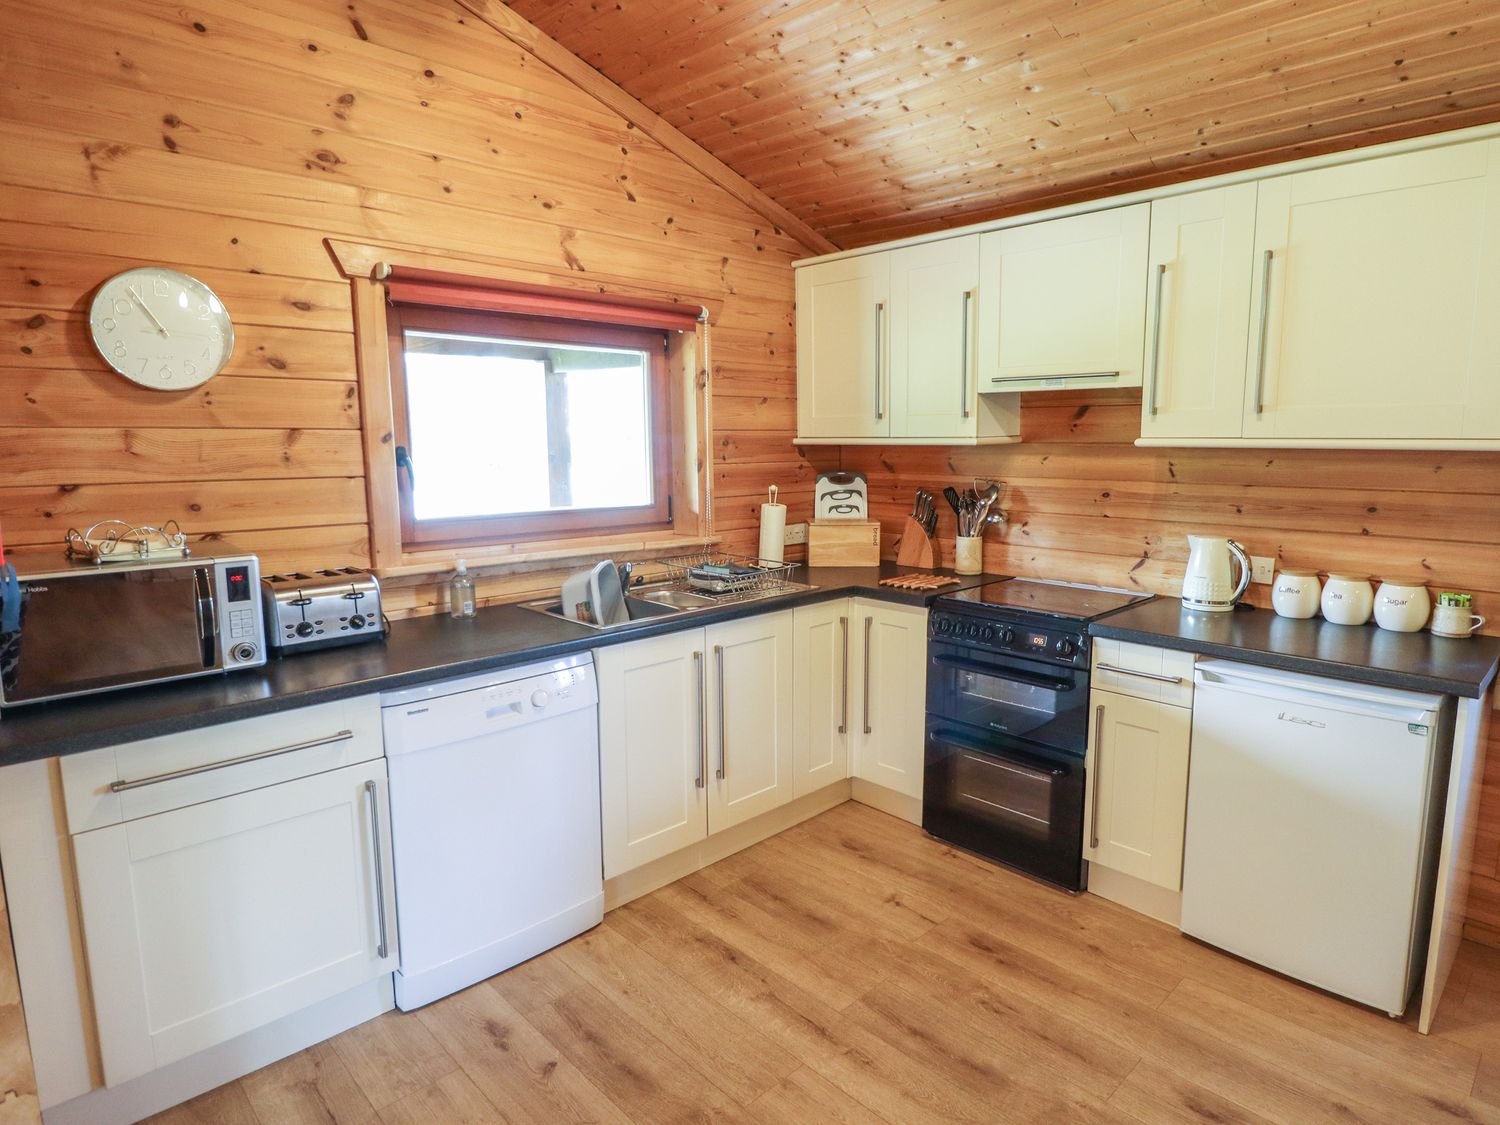 Badger Lodge in Stainfield in Lincolnshire, sleeps four in two bedrooms. Off-road parking and pets.